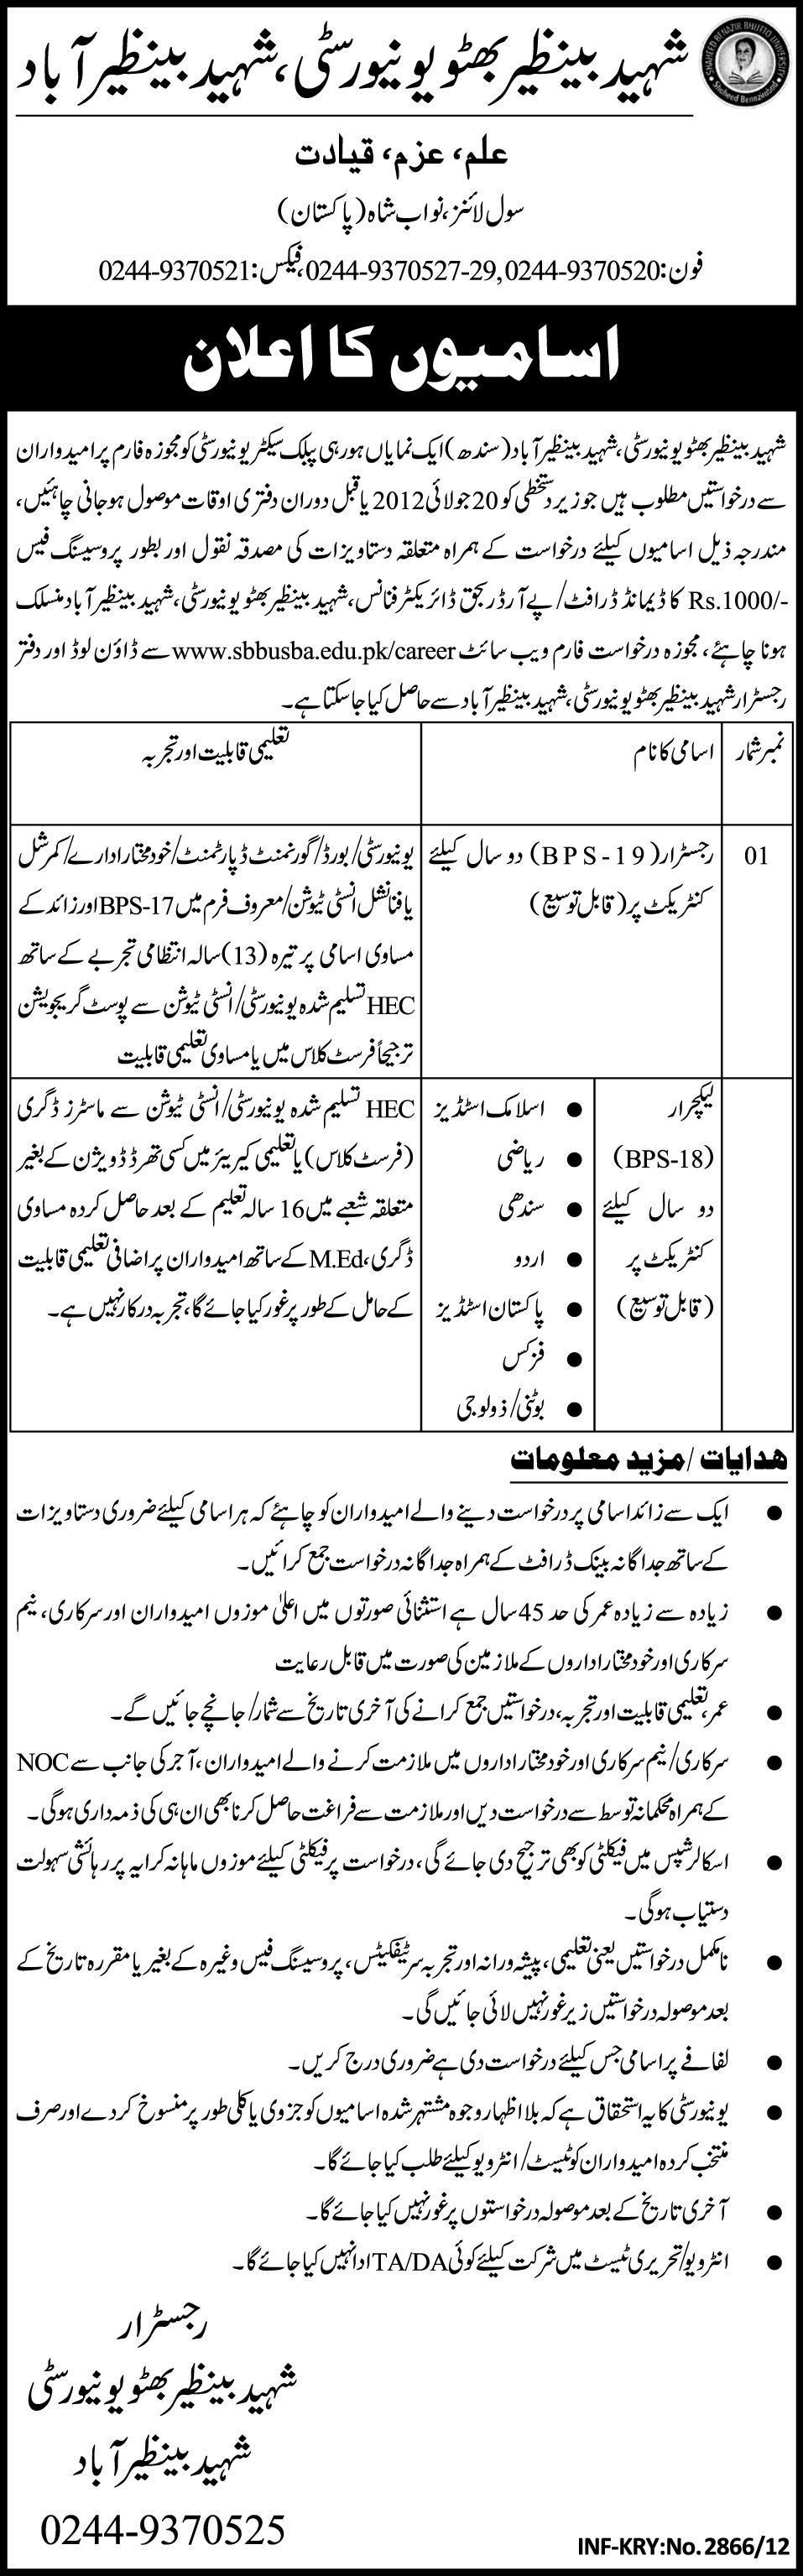 Lecturers and Registrar Required at Shaheed Benazir Bhutto University (Govt. job)